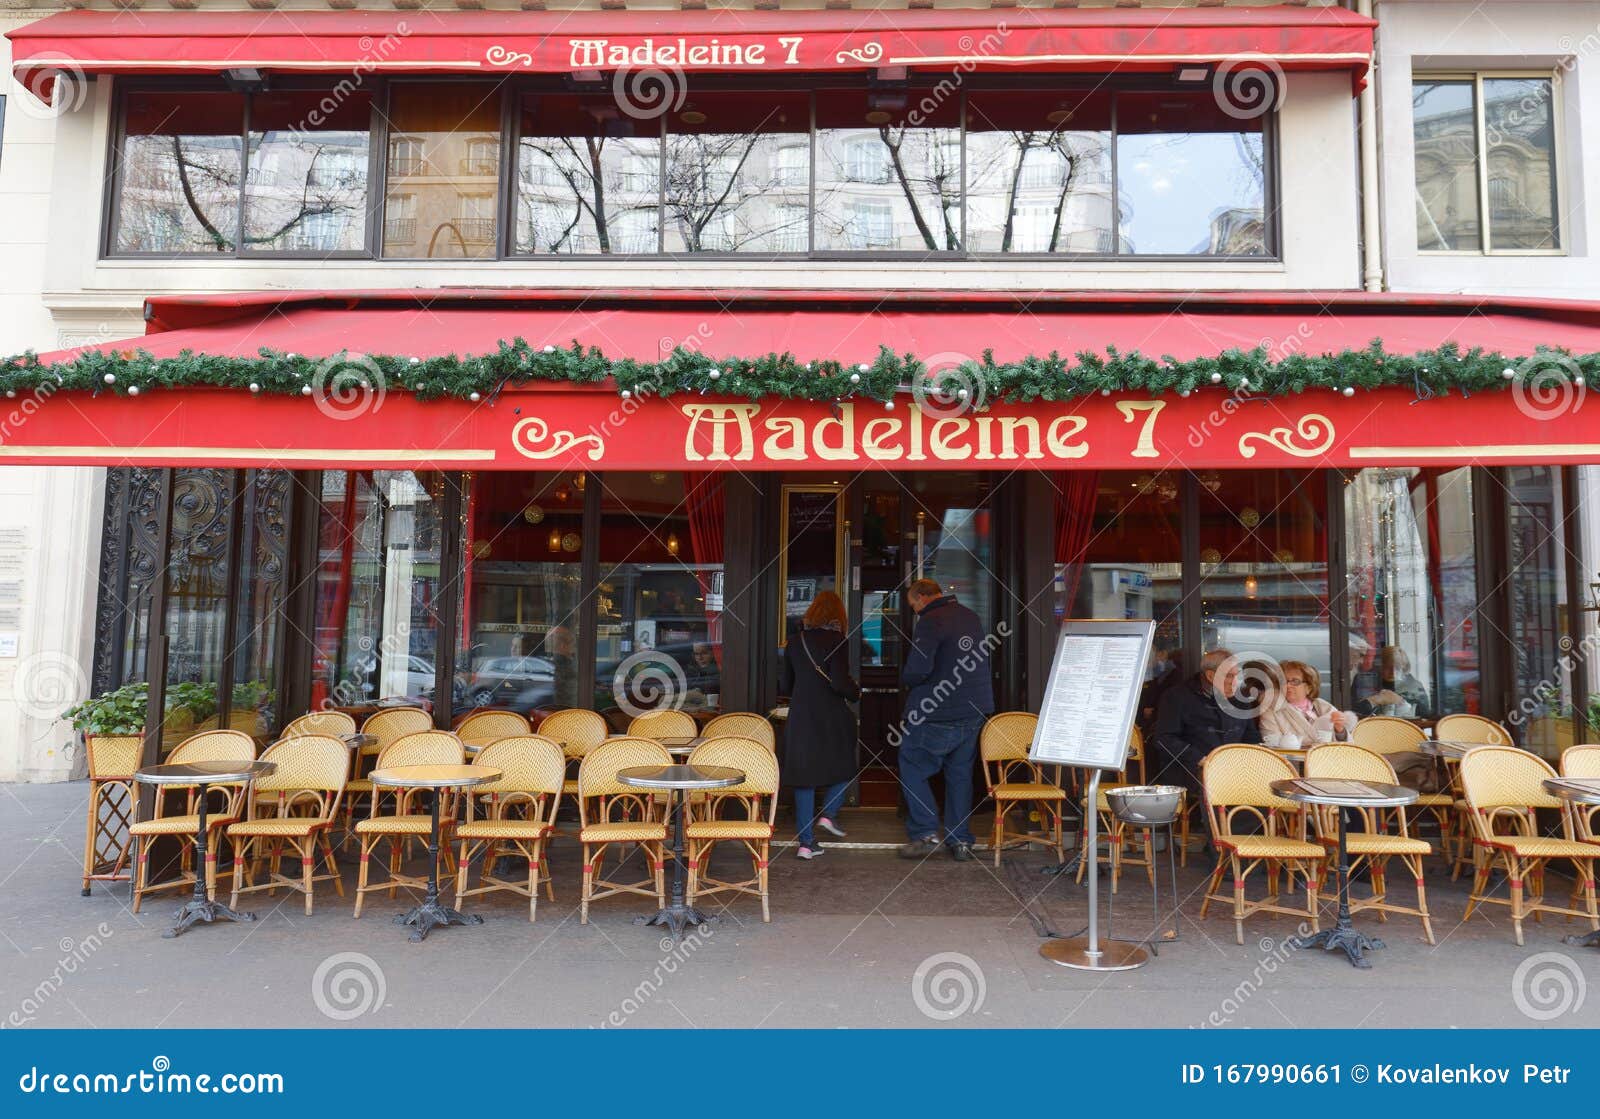 The French Cafe Restaurant Madeleine 7 Decorated For ...